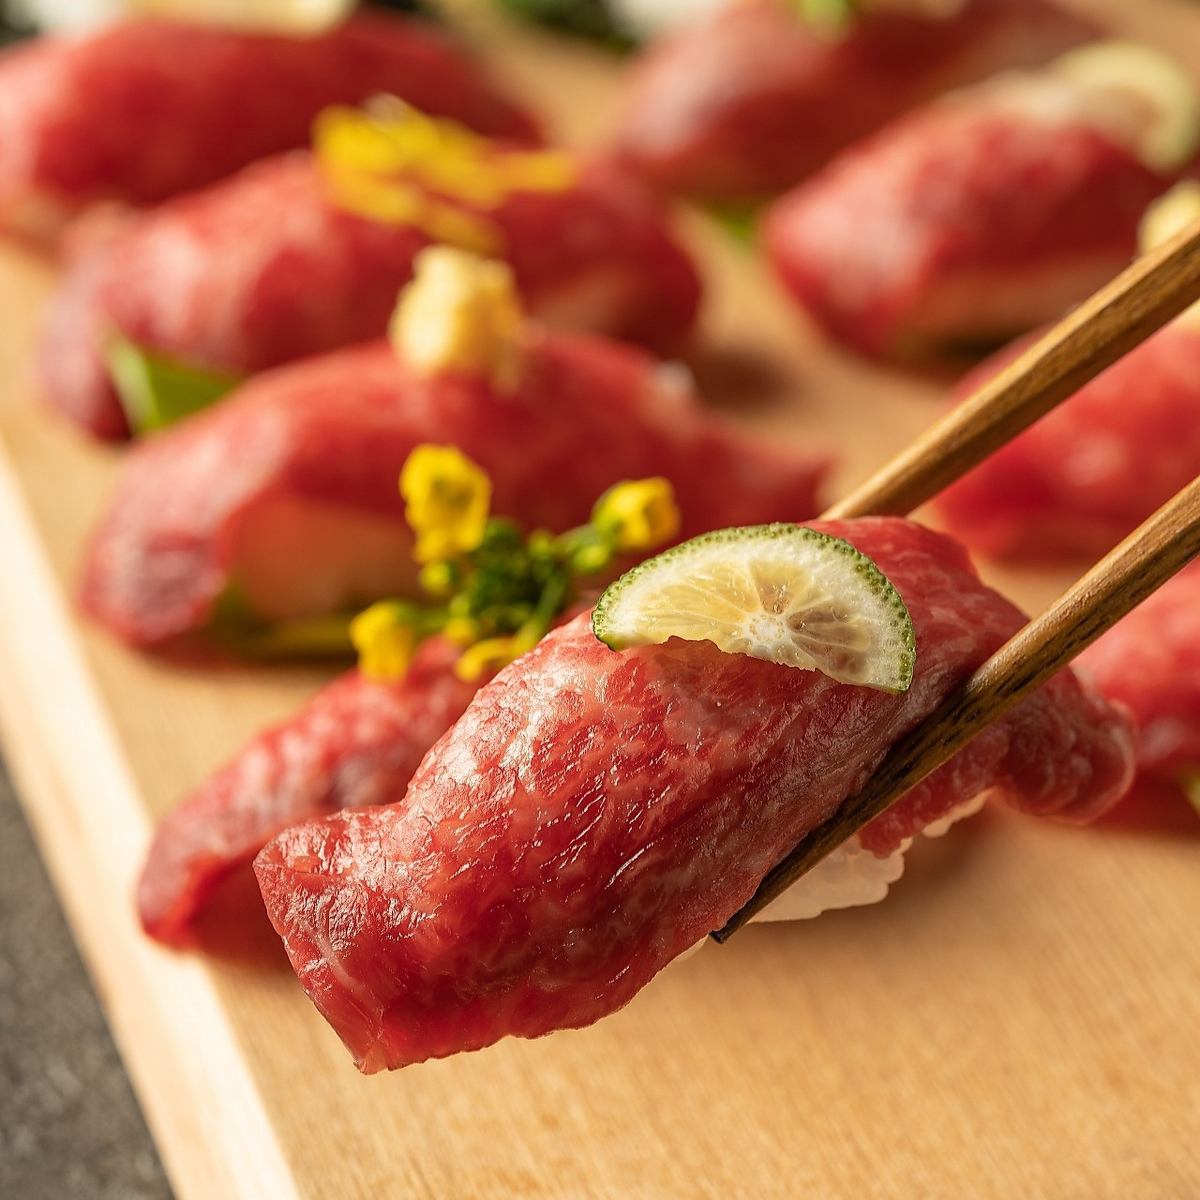 We offer a special price course where you can enjoy the famous meat sushi platter!